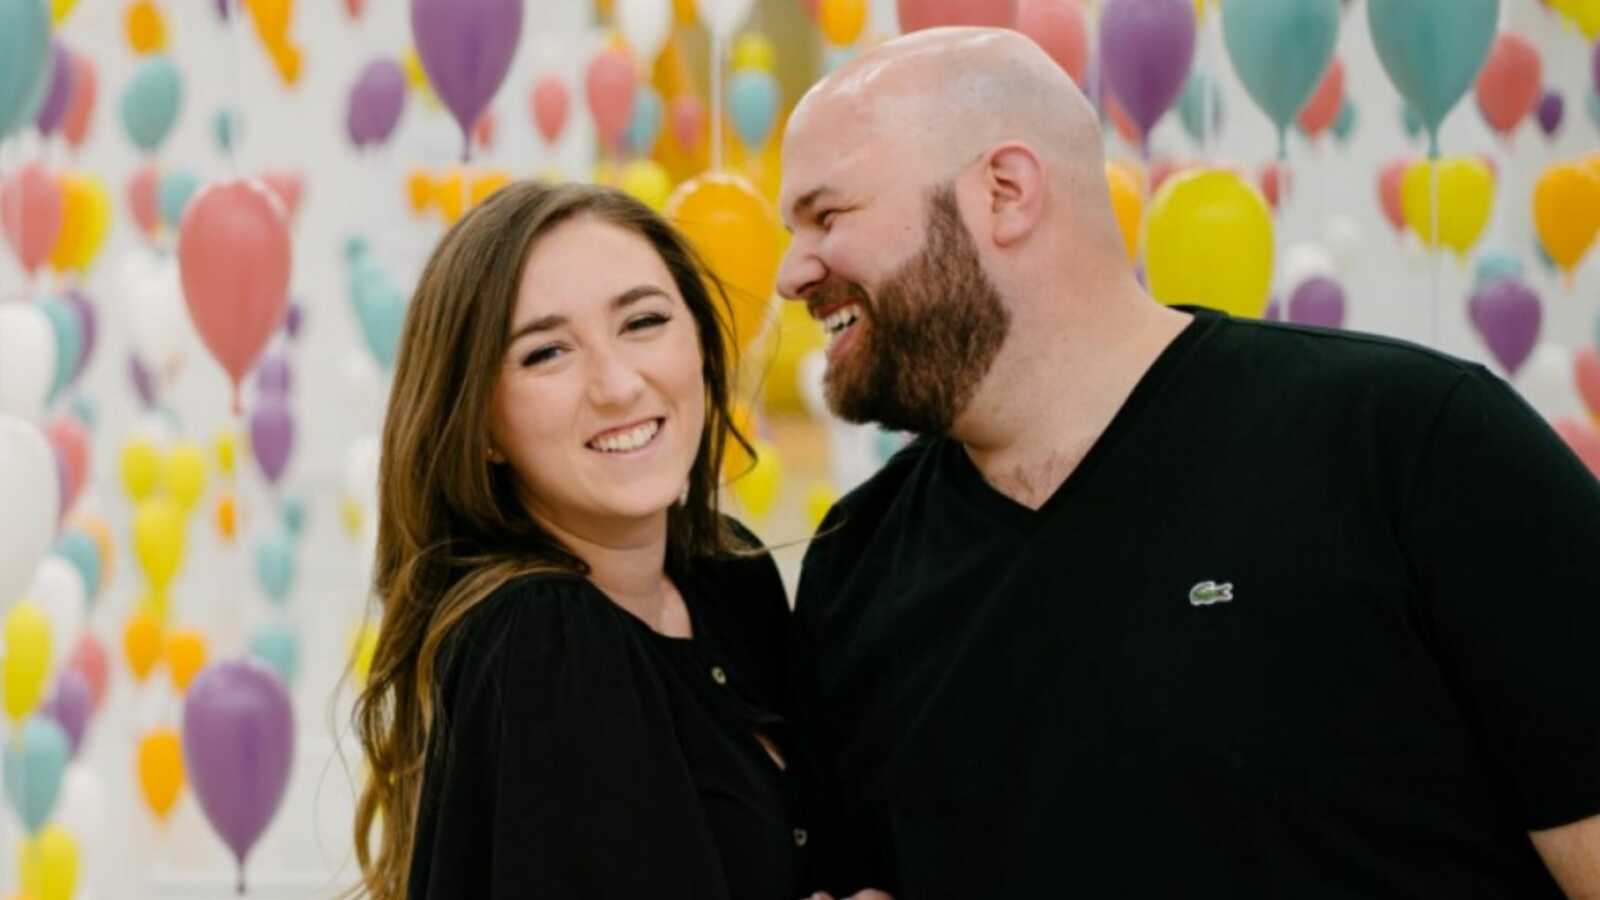 couple dressed in black posing in front of green, yellow, pink, and purple balloons